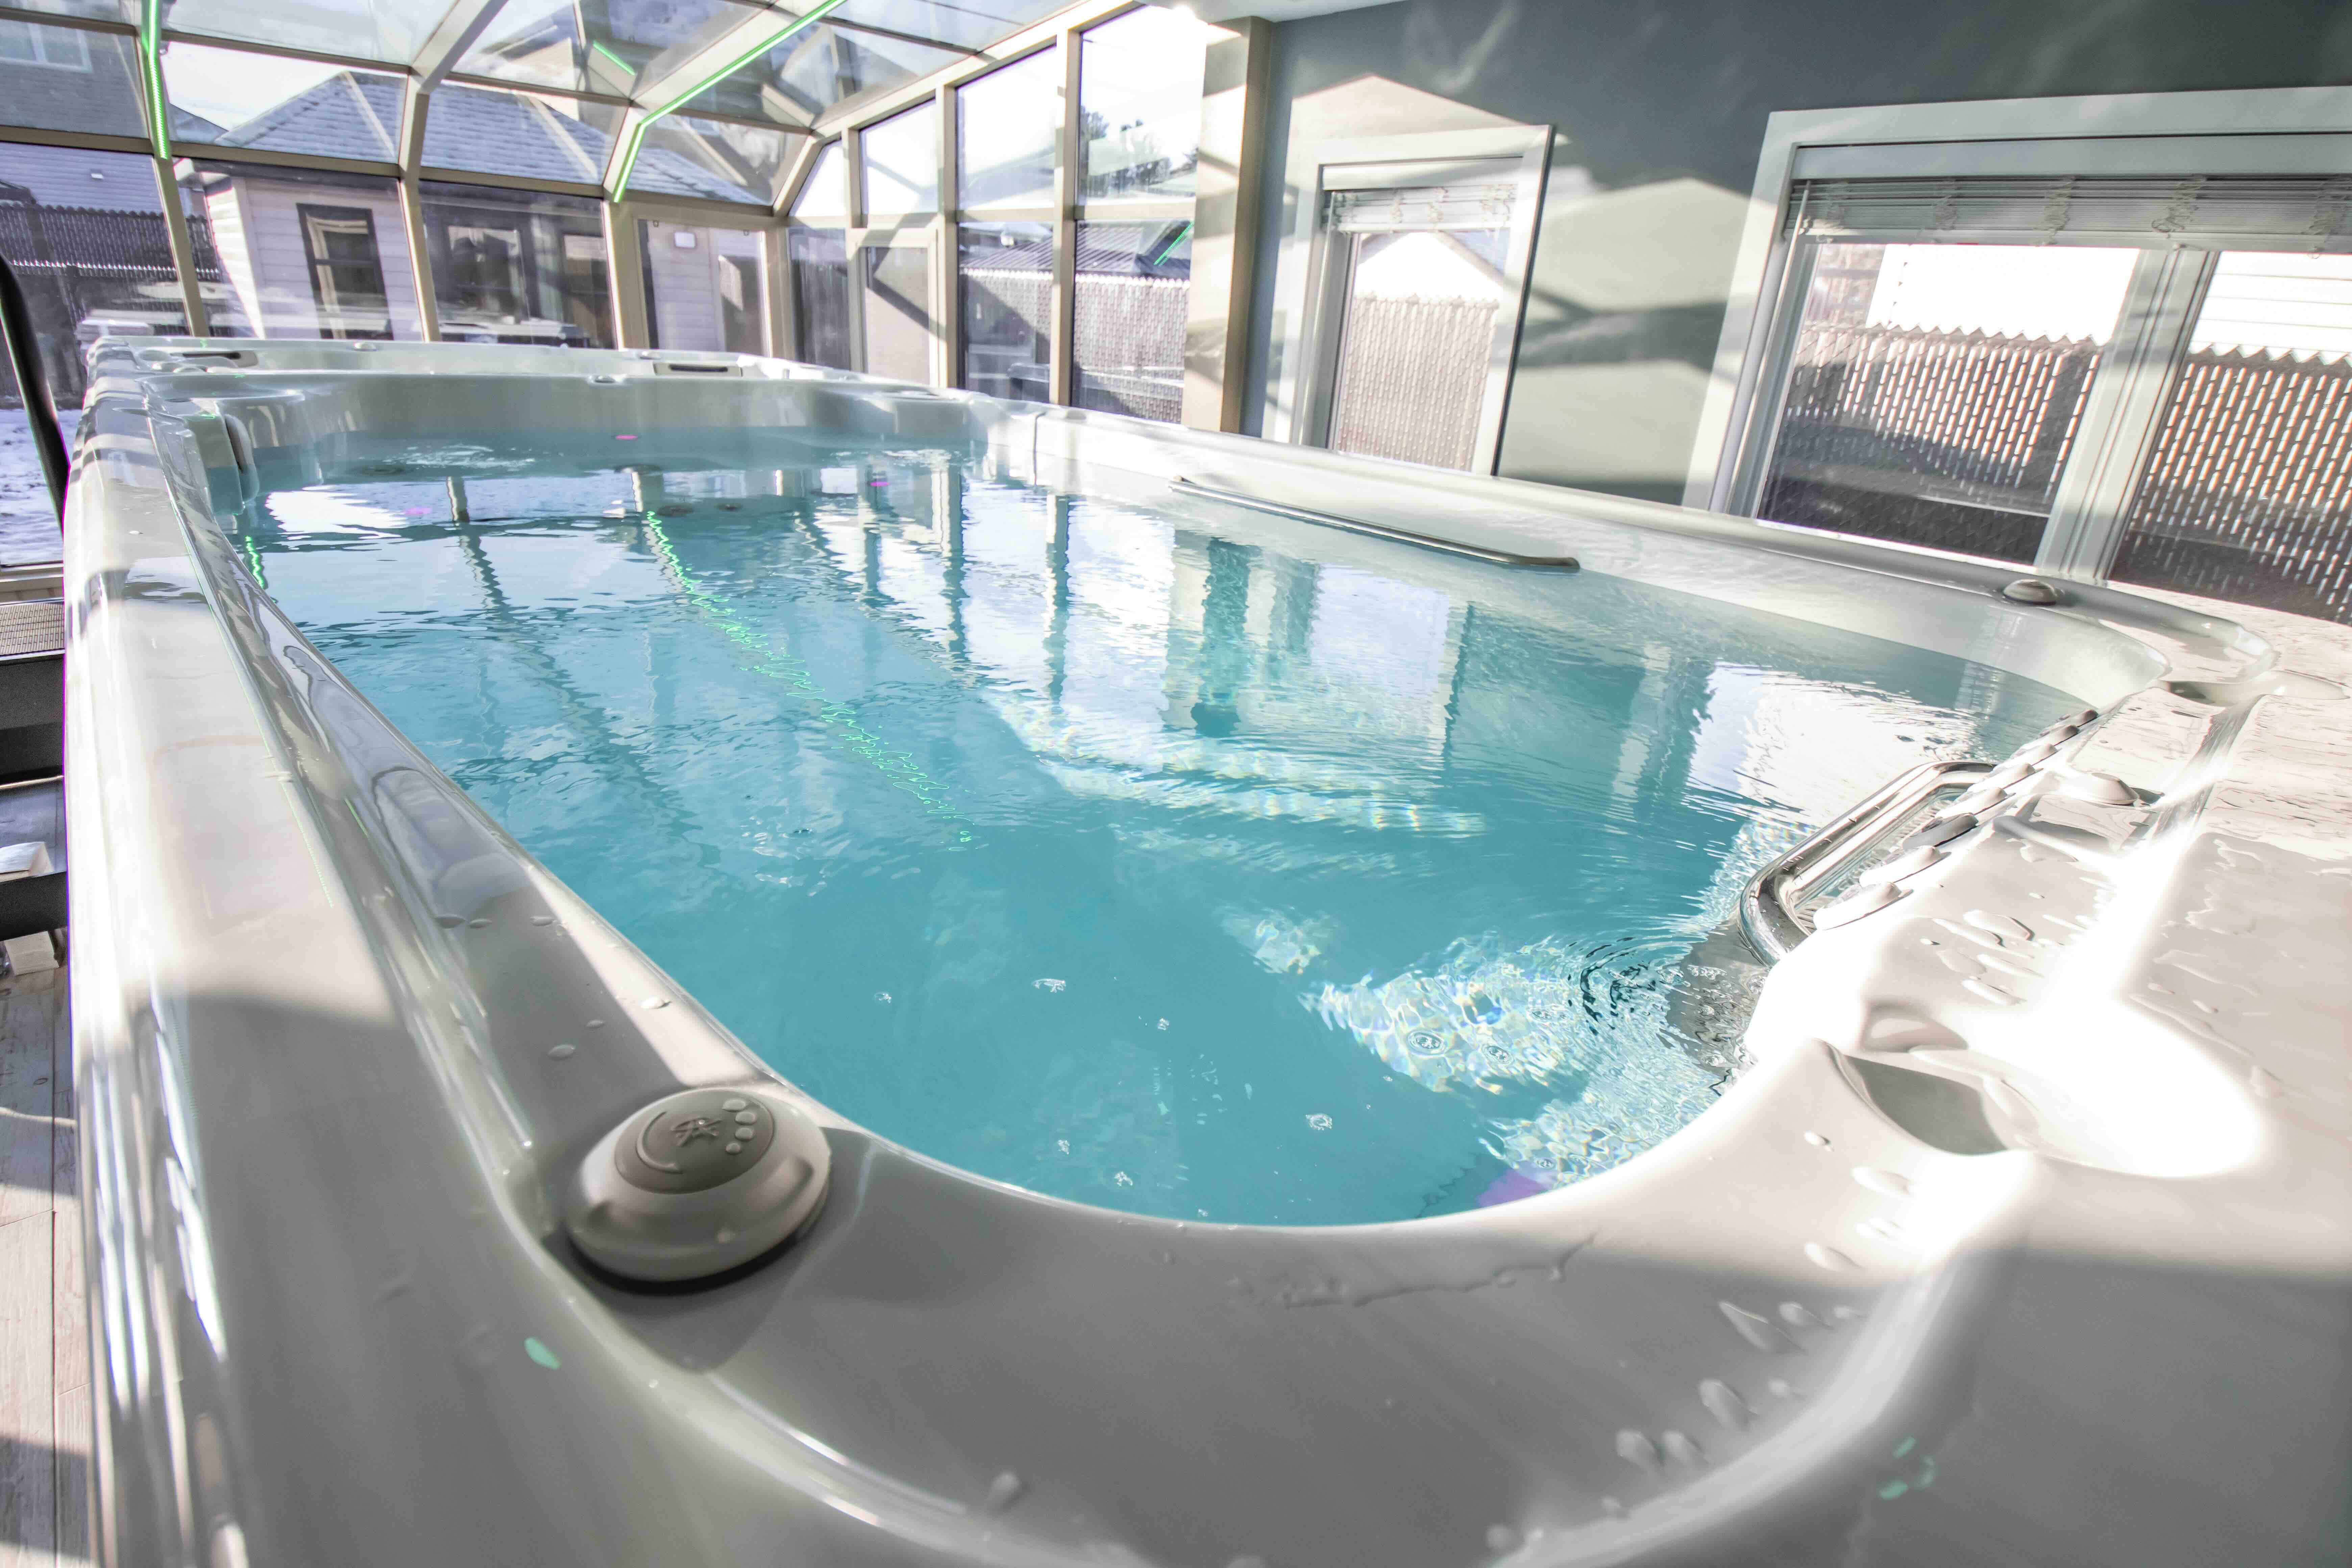 A pristine and sparkling swim spa that was chemically maintained and cleaned by the owner.  